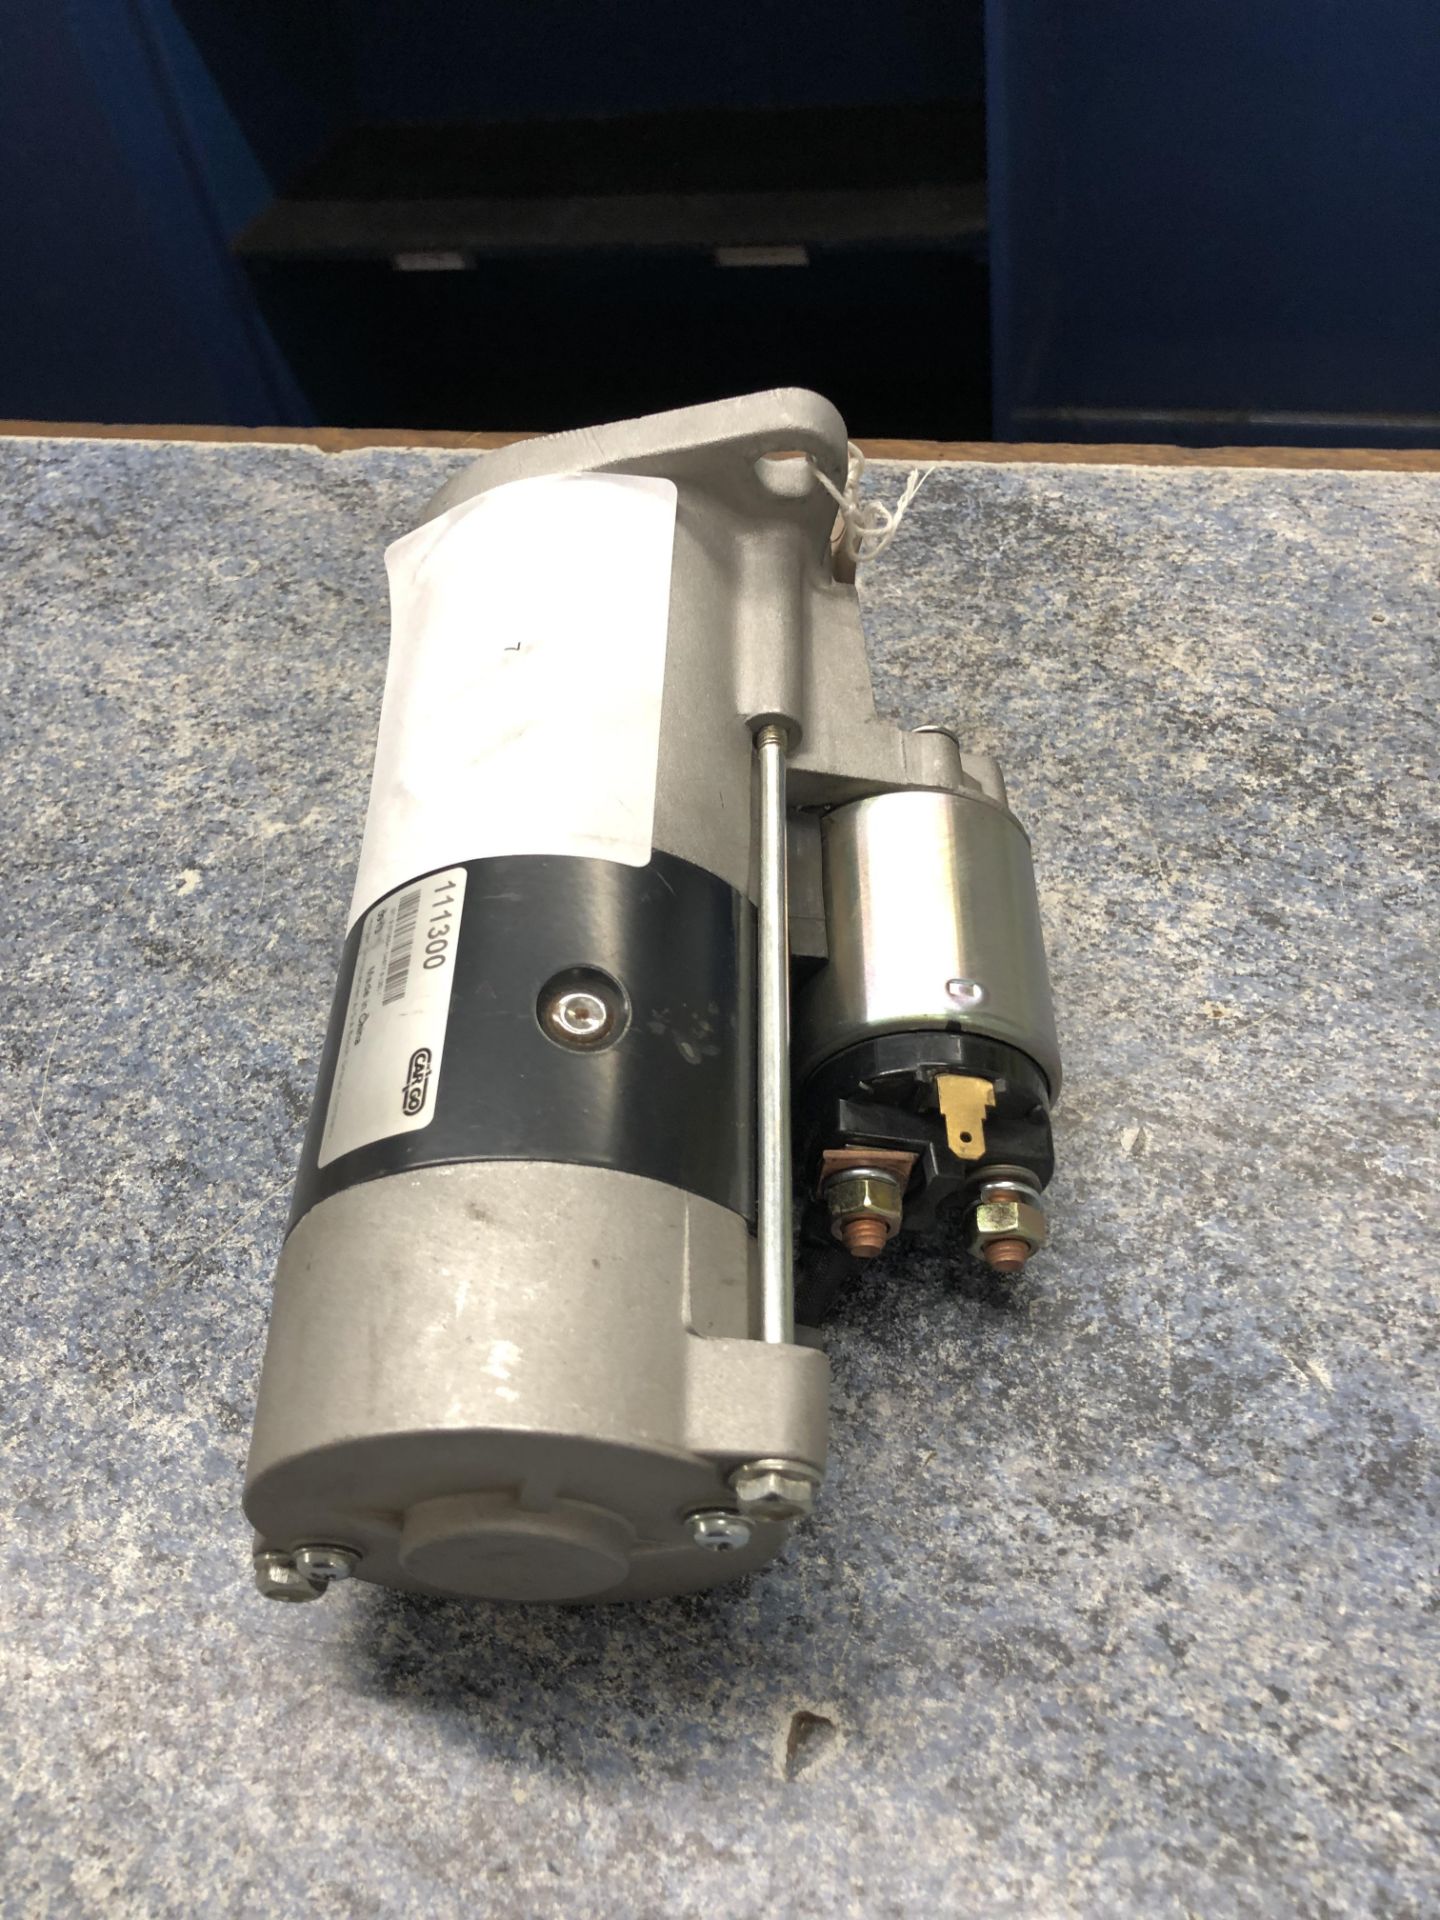 HC Cargo Starter Motor LRS 1294 - Collection By Appointment on Wednesday 12th June 2019) - Image 4 of 5